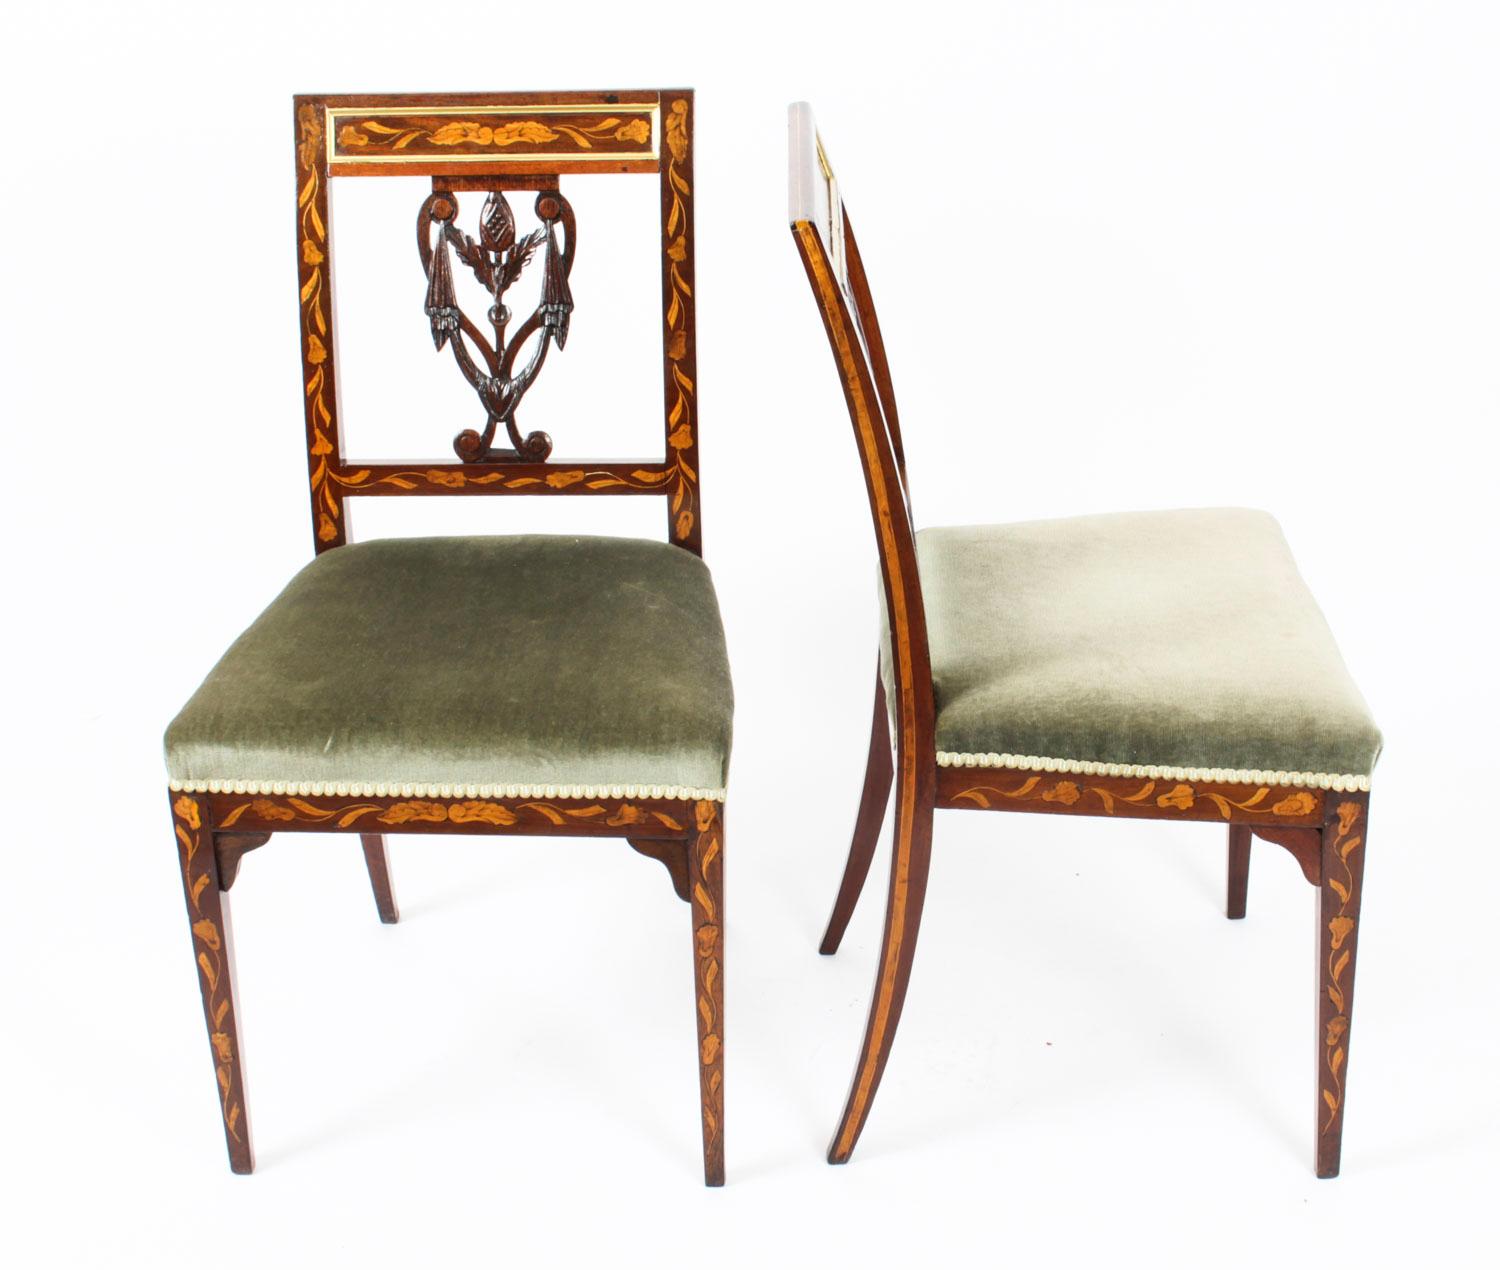 A beautiful and rare pair of antique Dutch Regency marquetry side chairs upholstered in pale green fabric and Circa 1820 in date.

They are made from mahogany and beautifully inlaid with floral marquetry, typical of Dutch furniture of this period.